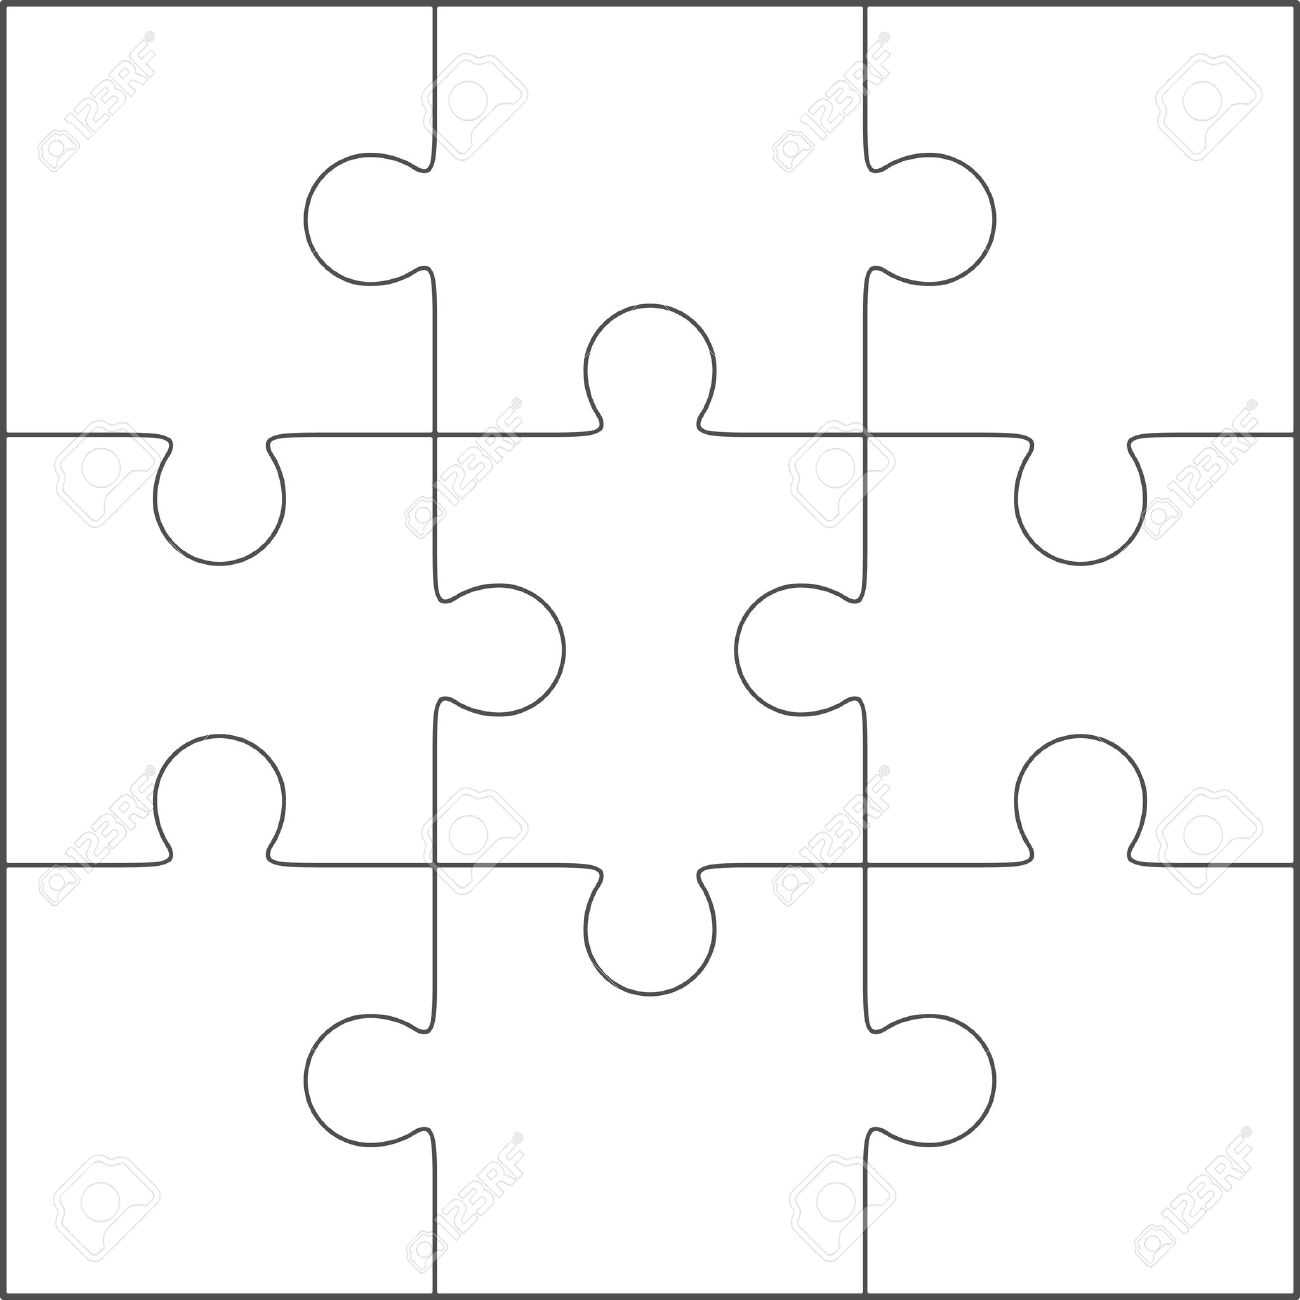 Jigsaw Puzzle Vector, Blank Simple Template 3X3 Pertaining To Blank Jigsaw Piece Template